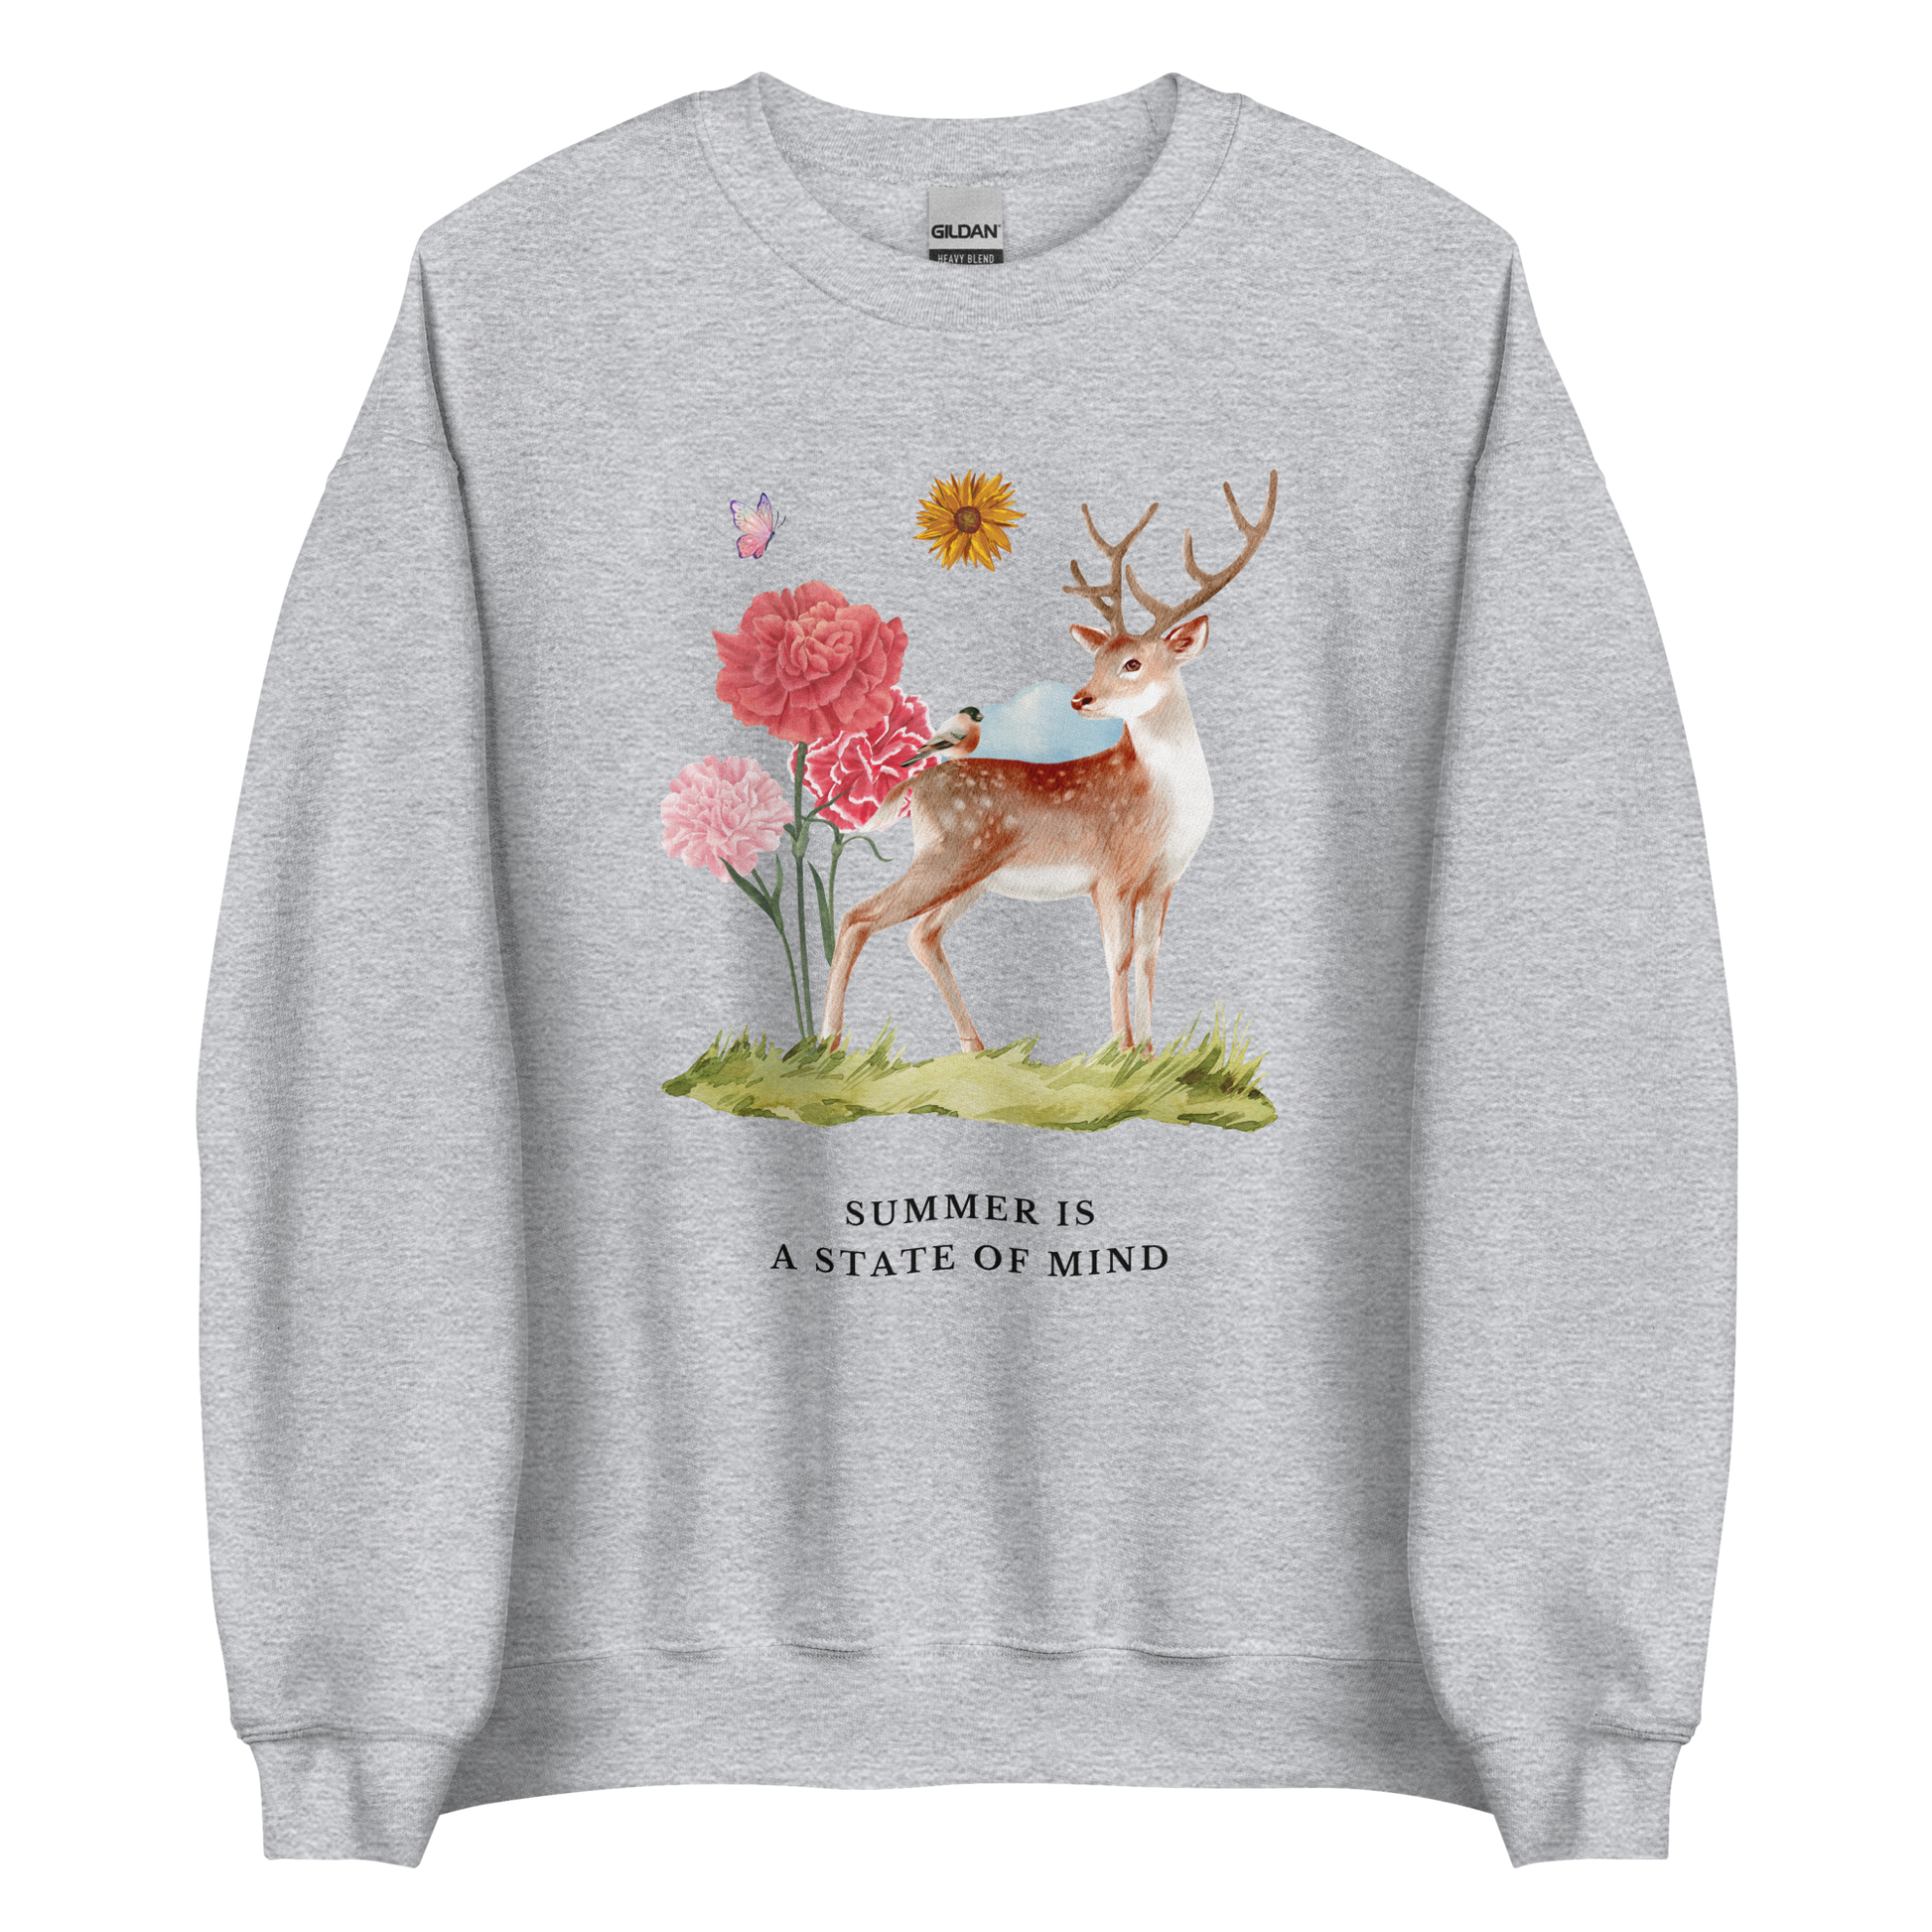 Sport Grey Summer Is a State of Mind Sweatshirt featuring a Summer Is a State of Mind graphic on the chest - Cute Graphic Summer Sweatshirts - Boozy Fox